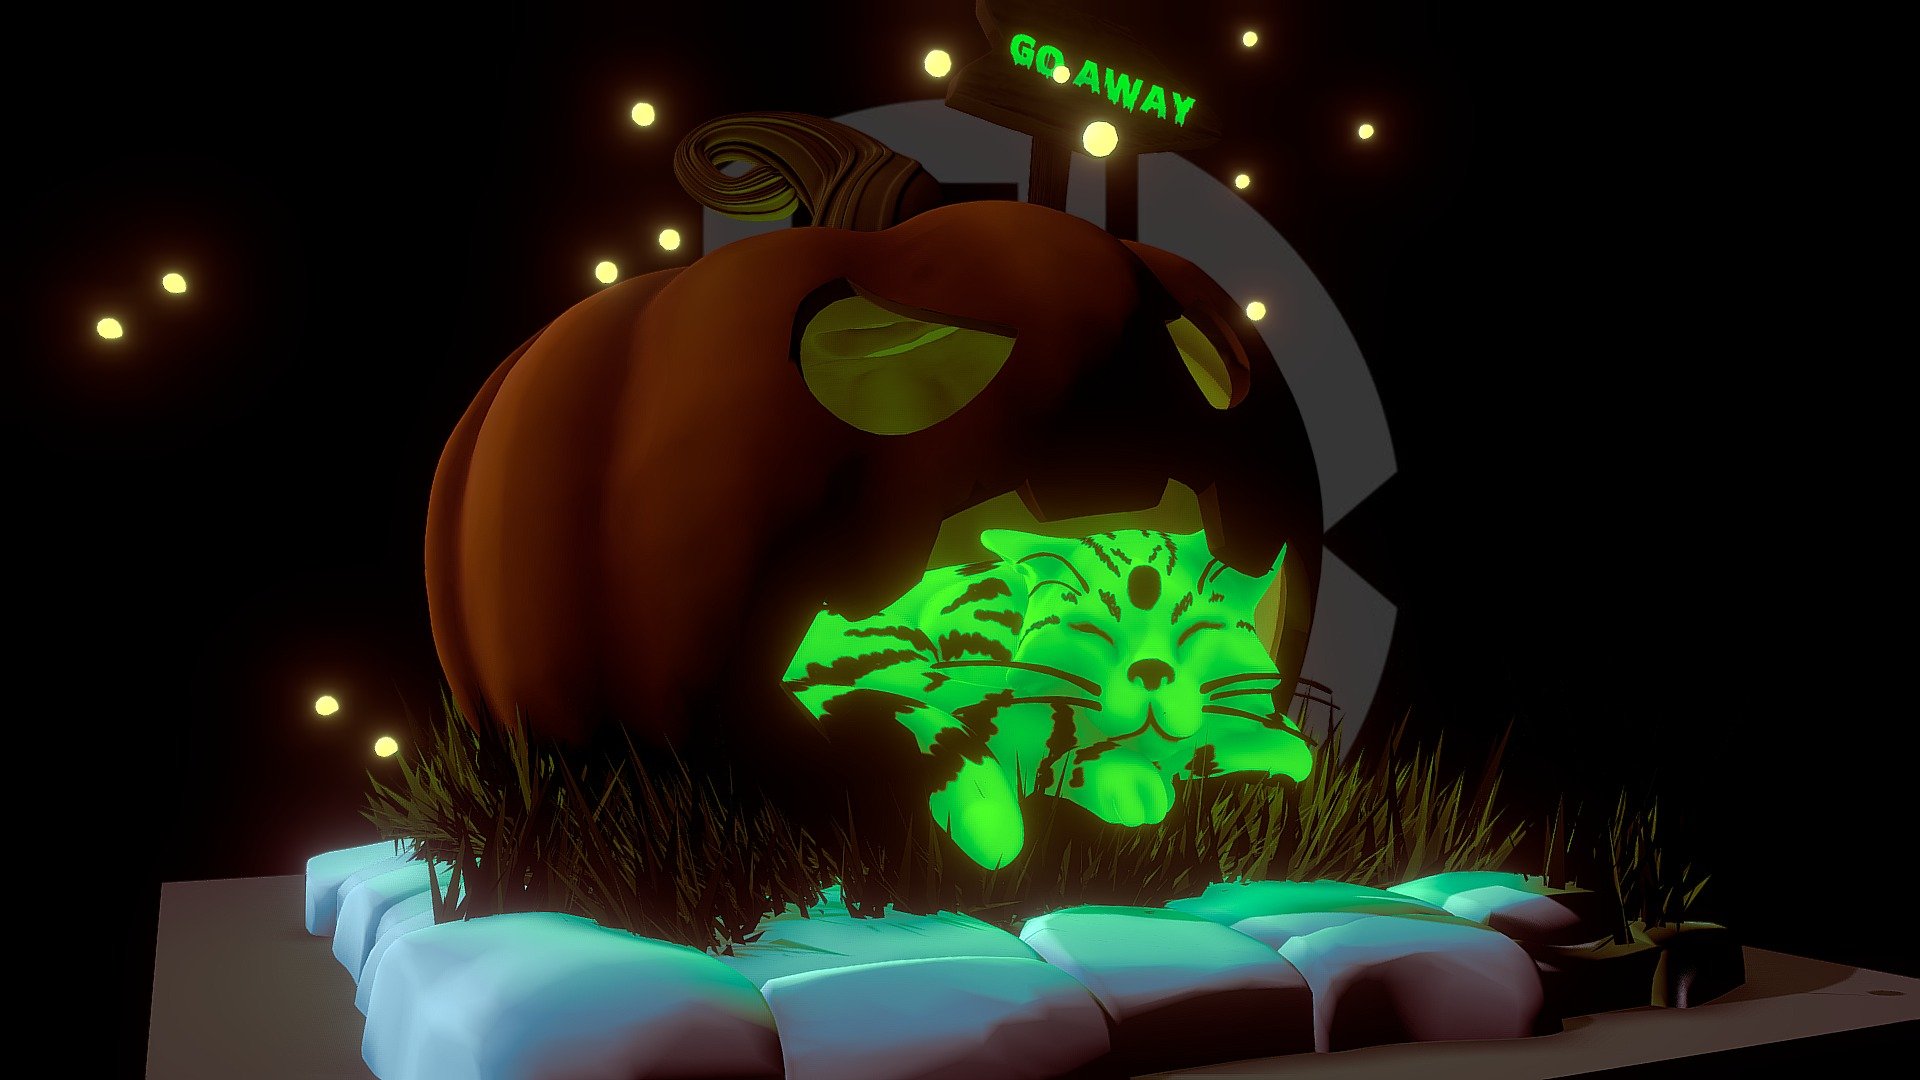 This is my entry made in my free time  for the Sketchfab Sculpting Challenge: Digital Pumpkin Carving

Hope you like!


PumpkinCarvingChallenge 3d model